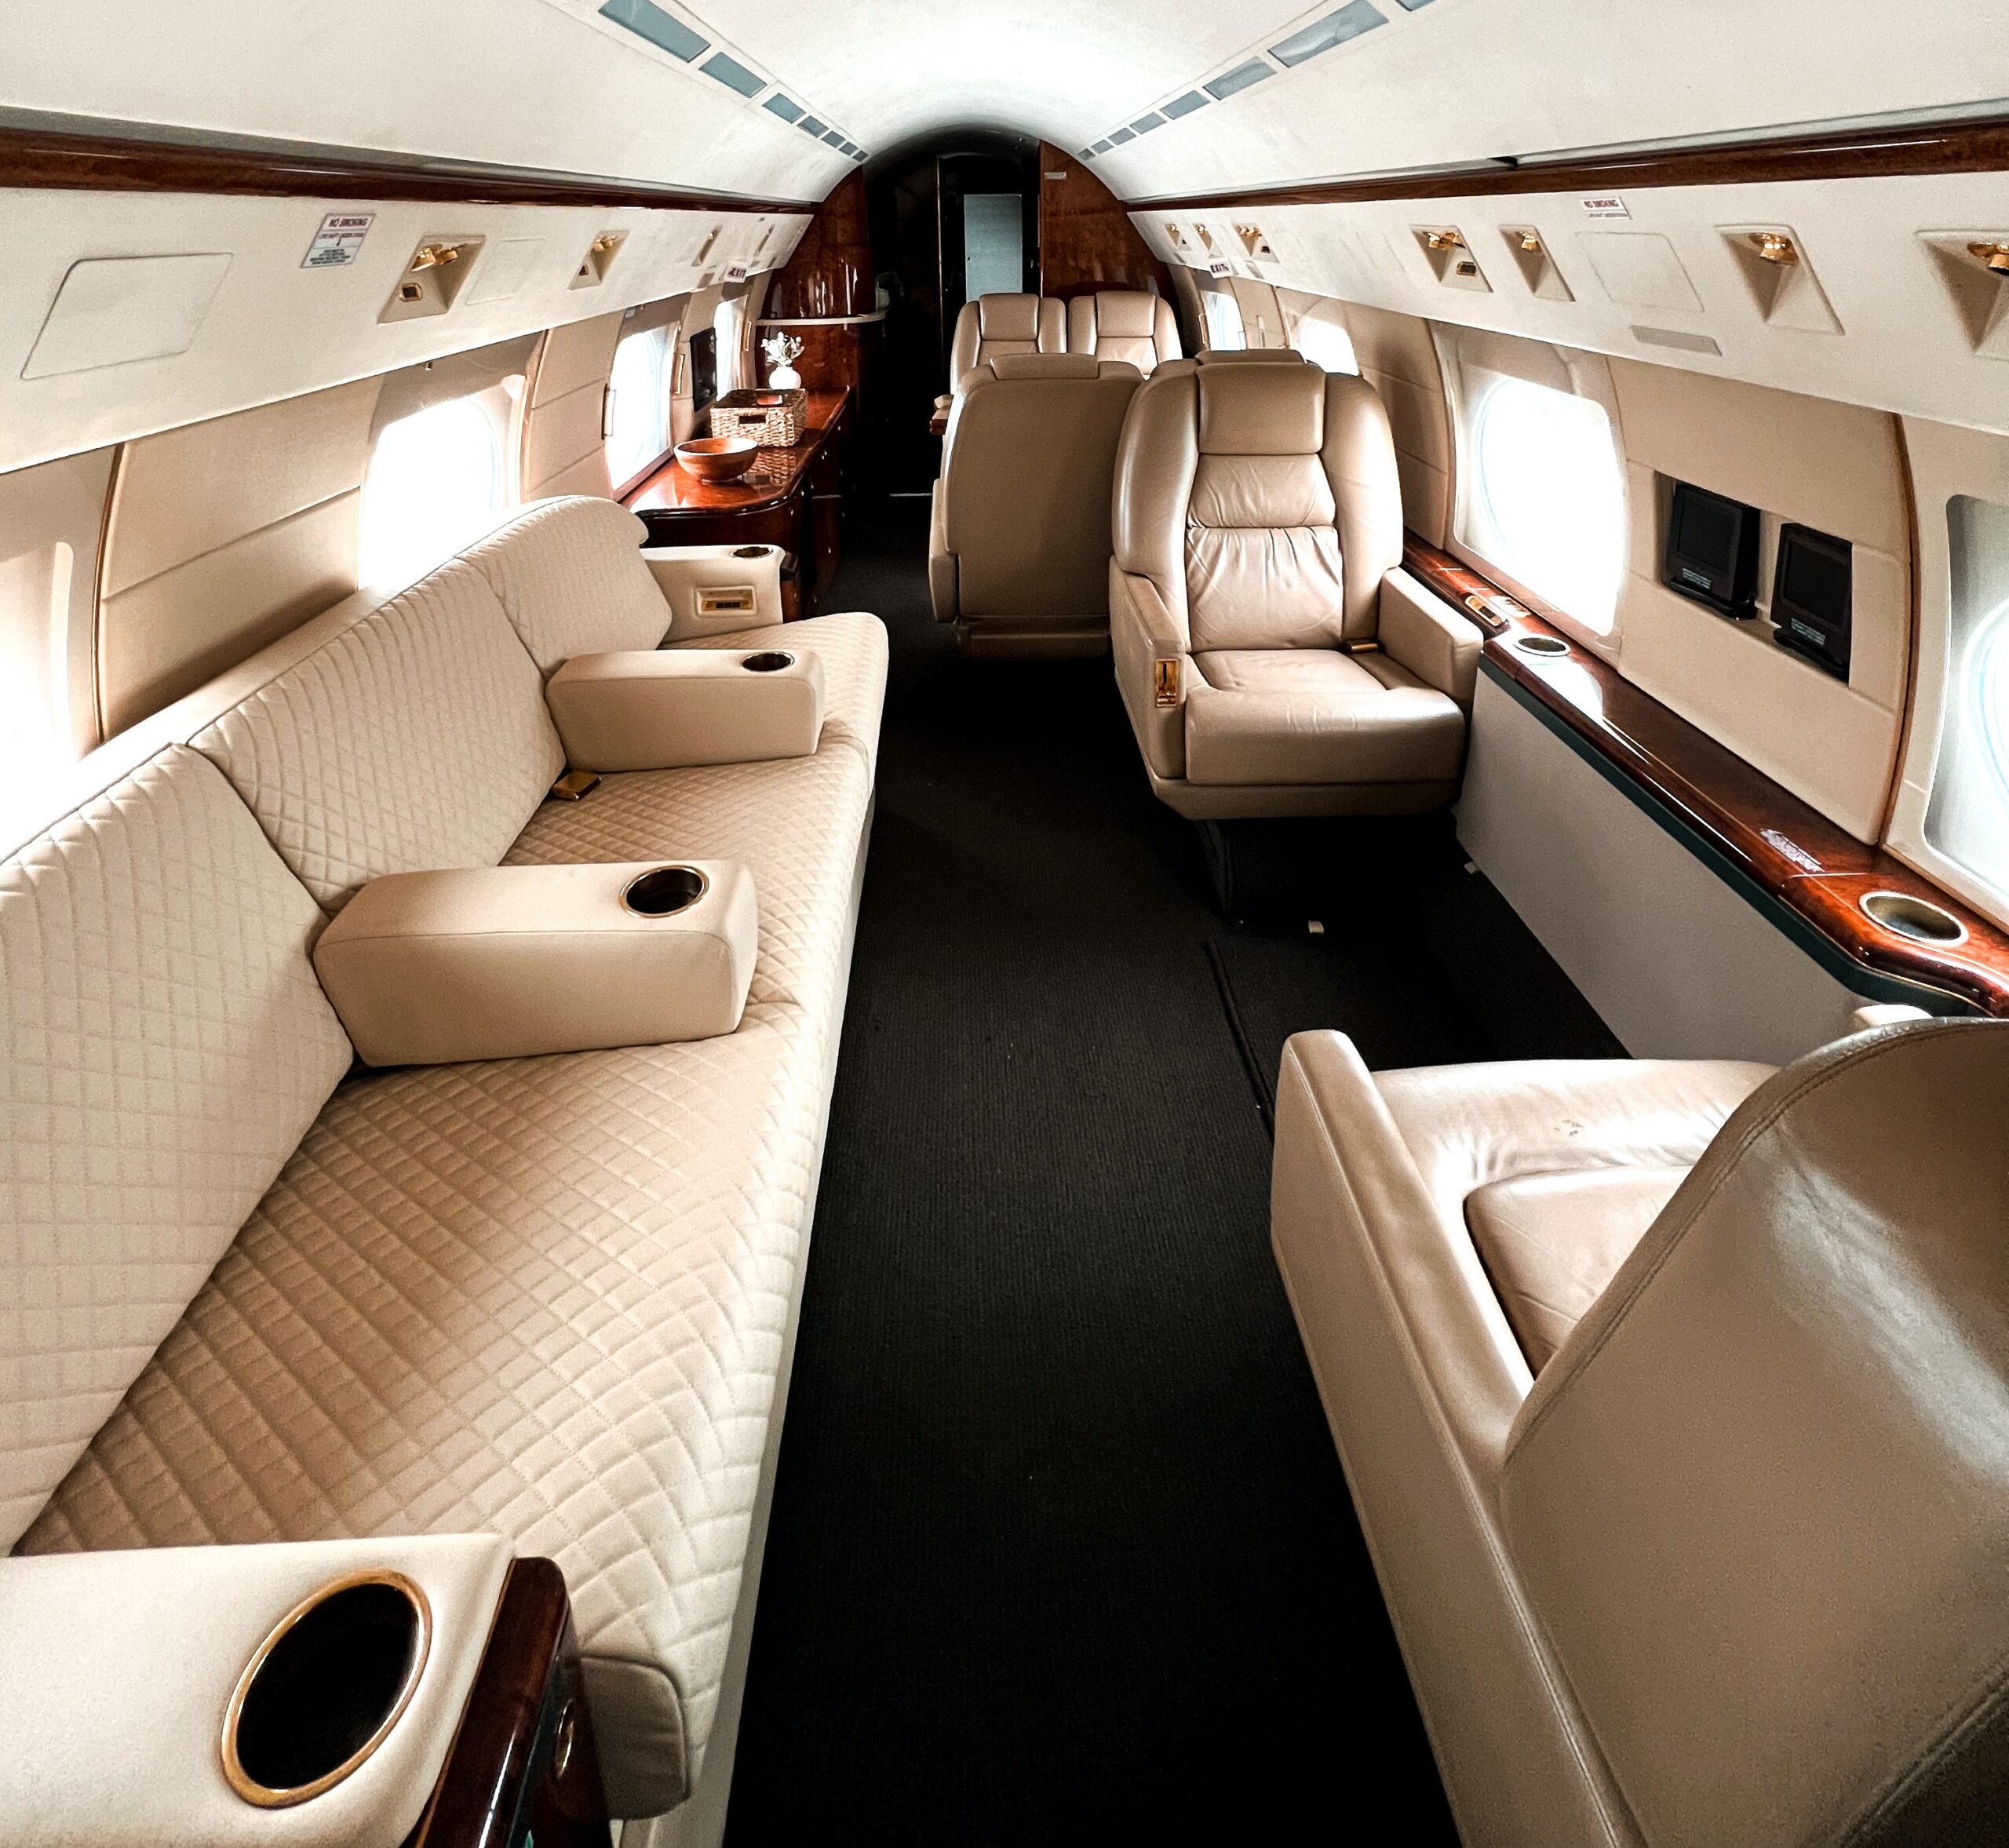 What Are the Custom Interior Design Options for Private Jet Owners